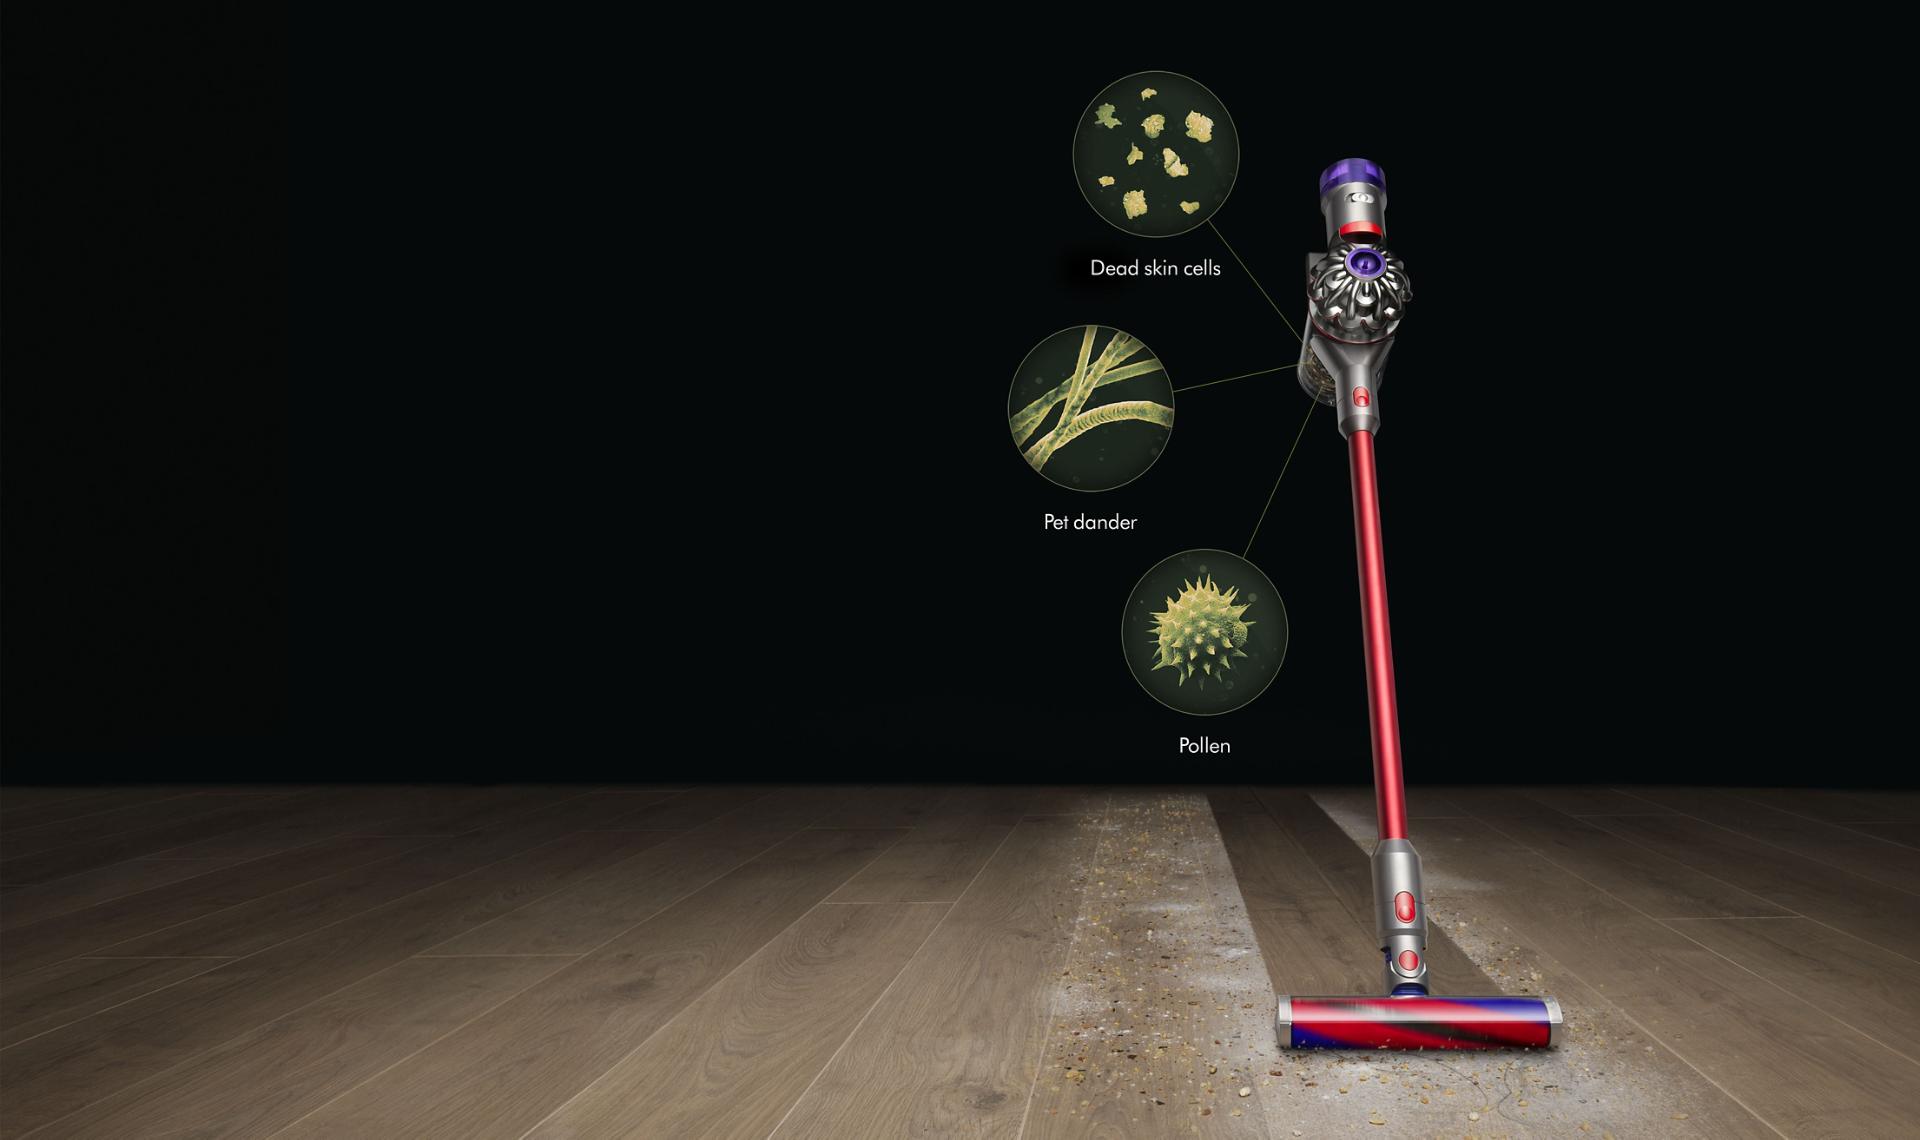 Dyson V8 Slim cleaning cleaning dust from a hard floor